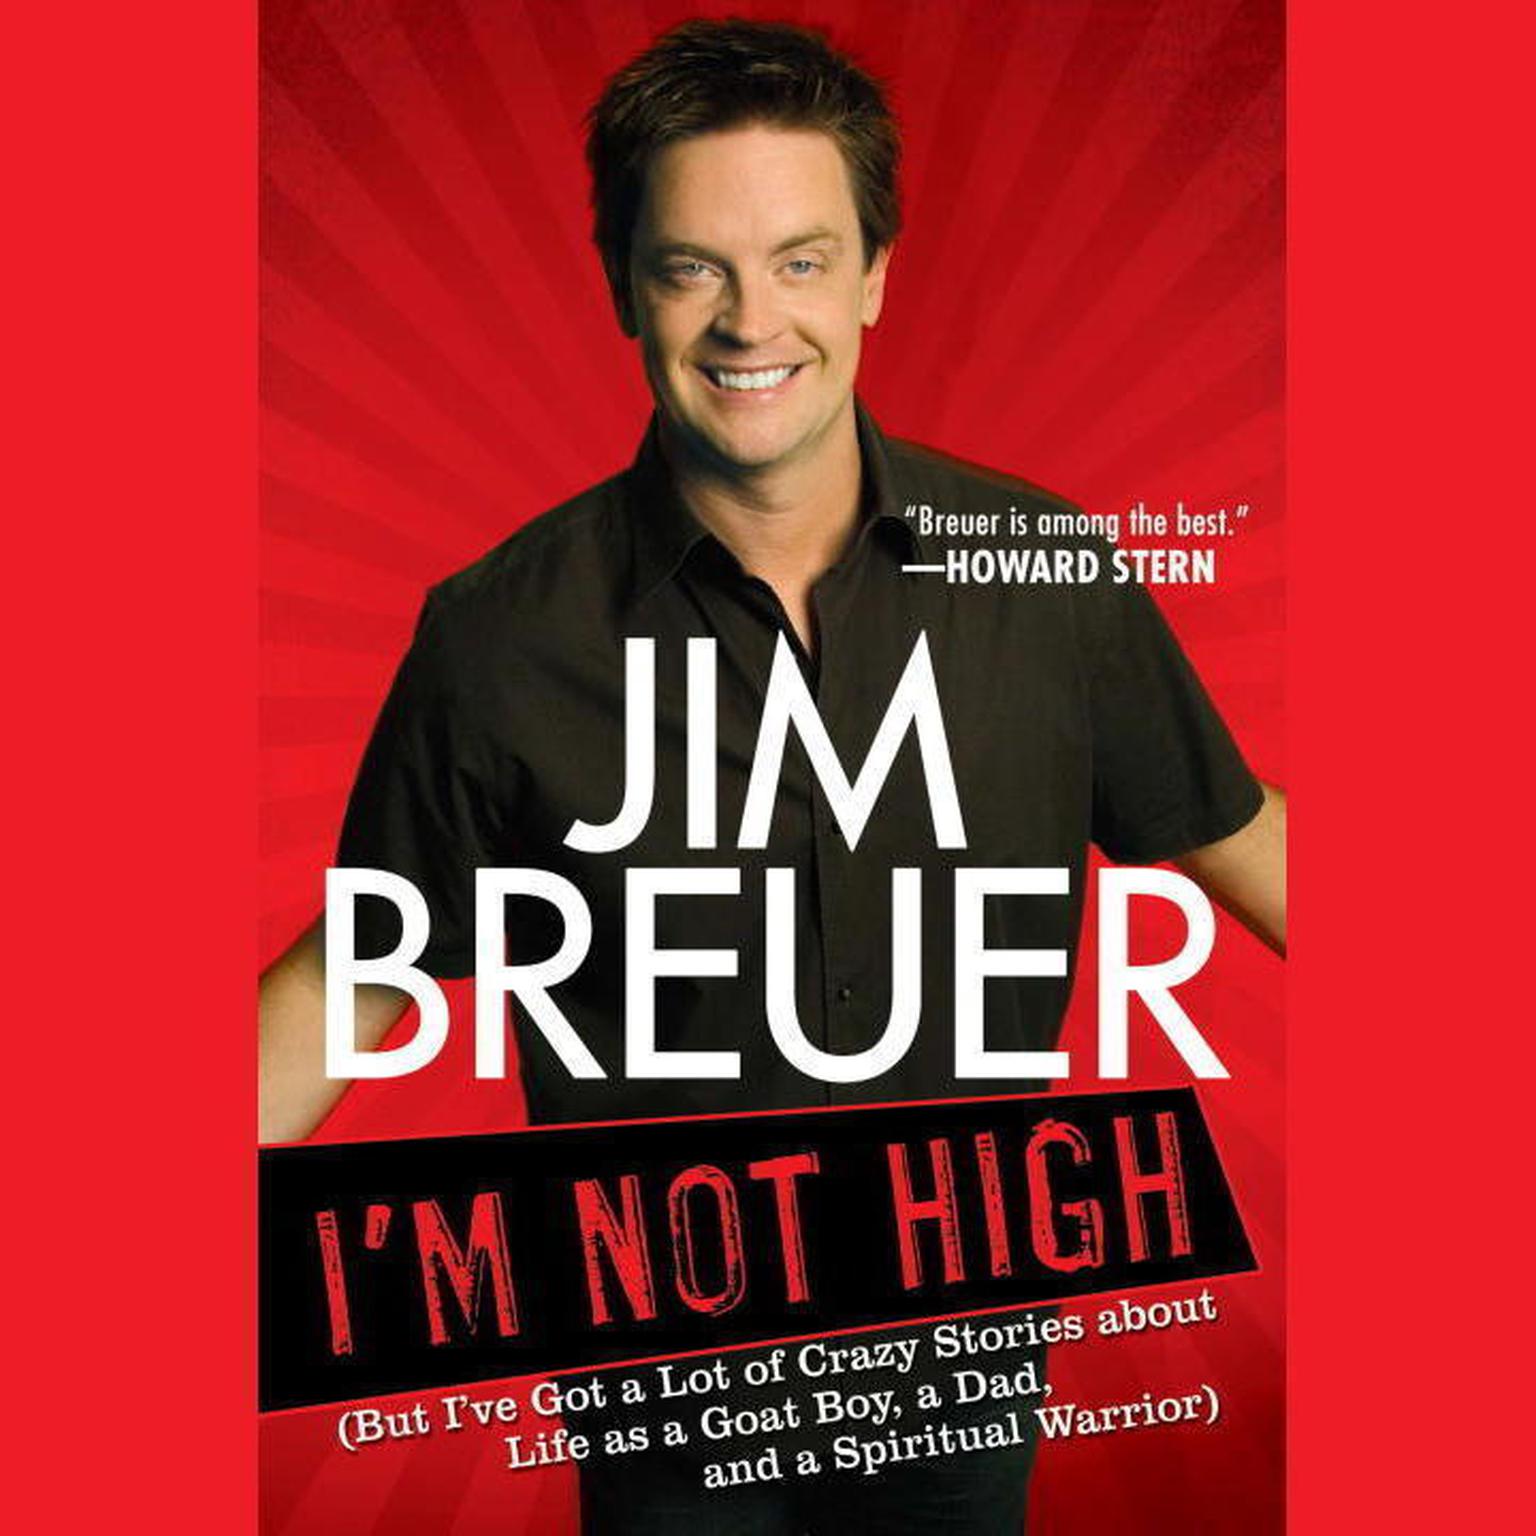 Im Not High: (But Ive Got a Lot of Crazy Stories about Life as a Goat Boy, a Dad, and a Spir itual Warrior) Audiobook, by Jim Breuer